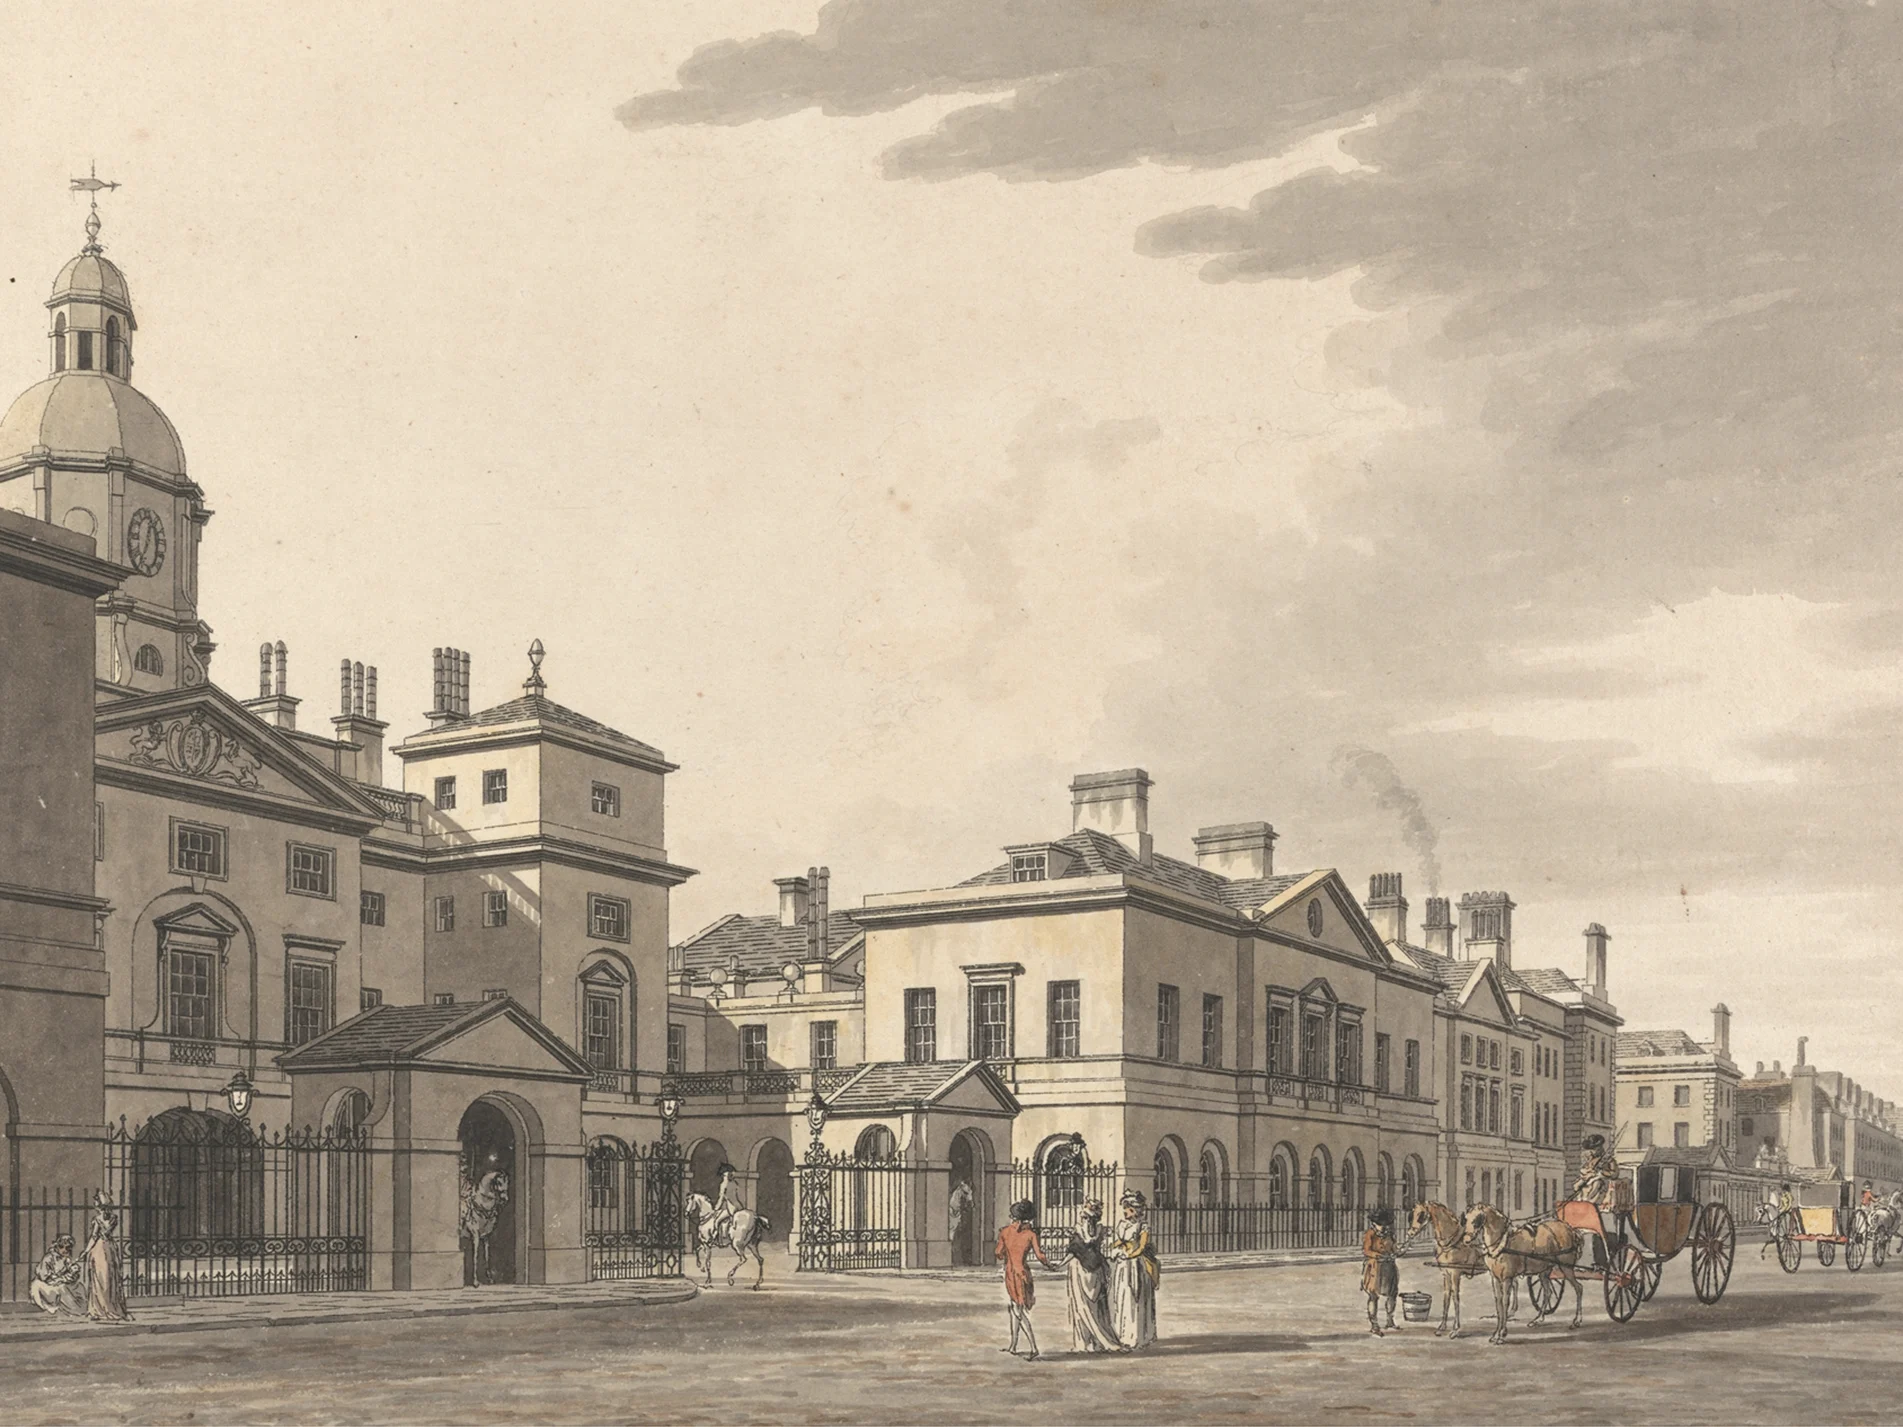 Horse Guards, Whitehall by Thomas Malton the Younger (1748 - 1804)